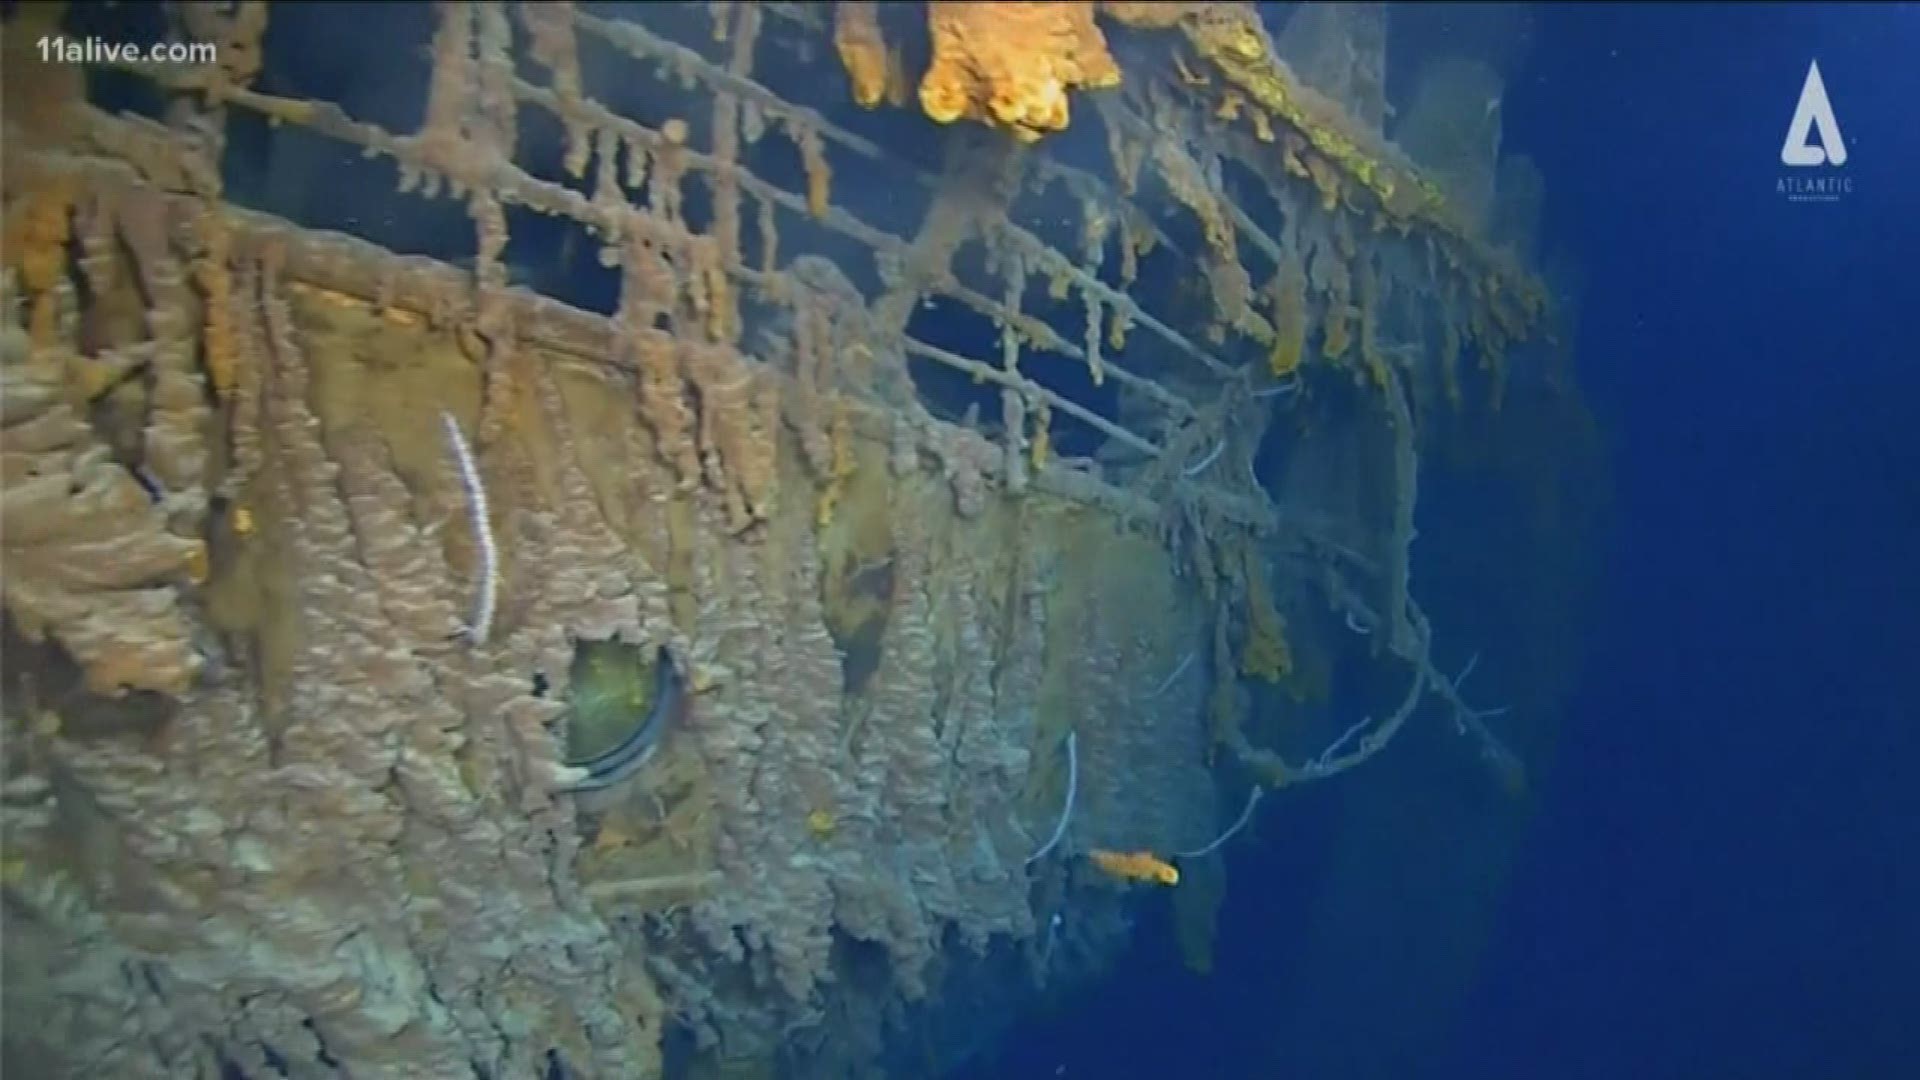 New video of Titanic wreckage released